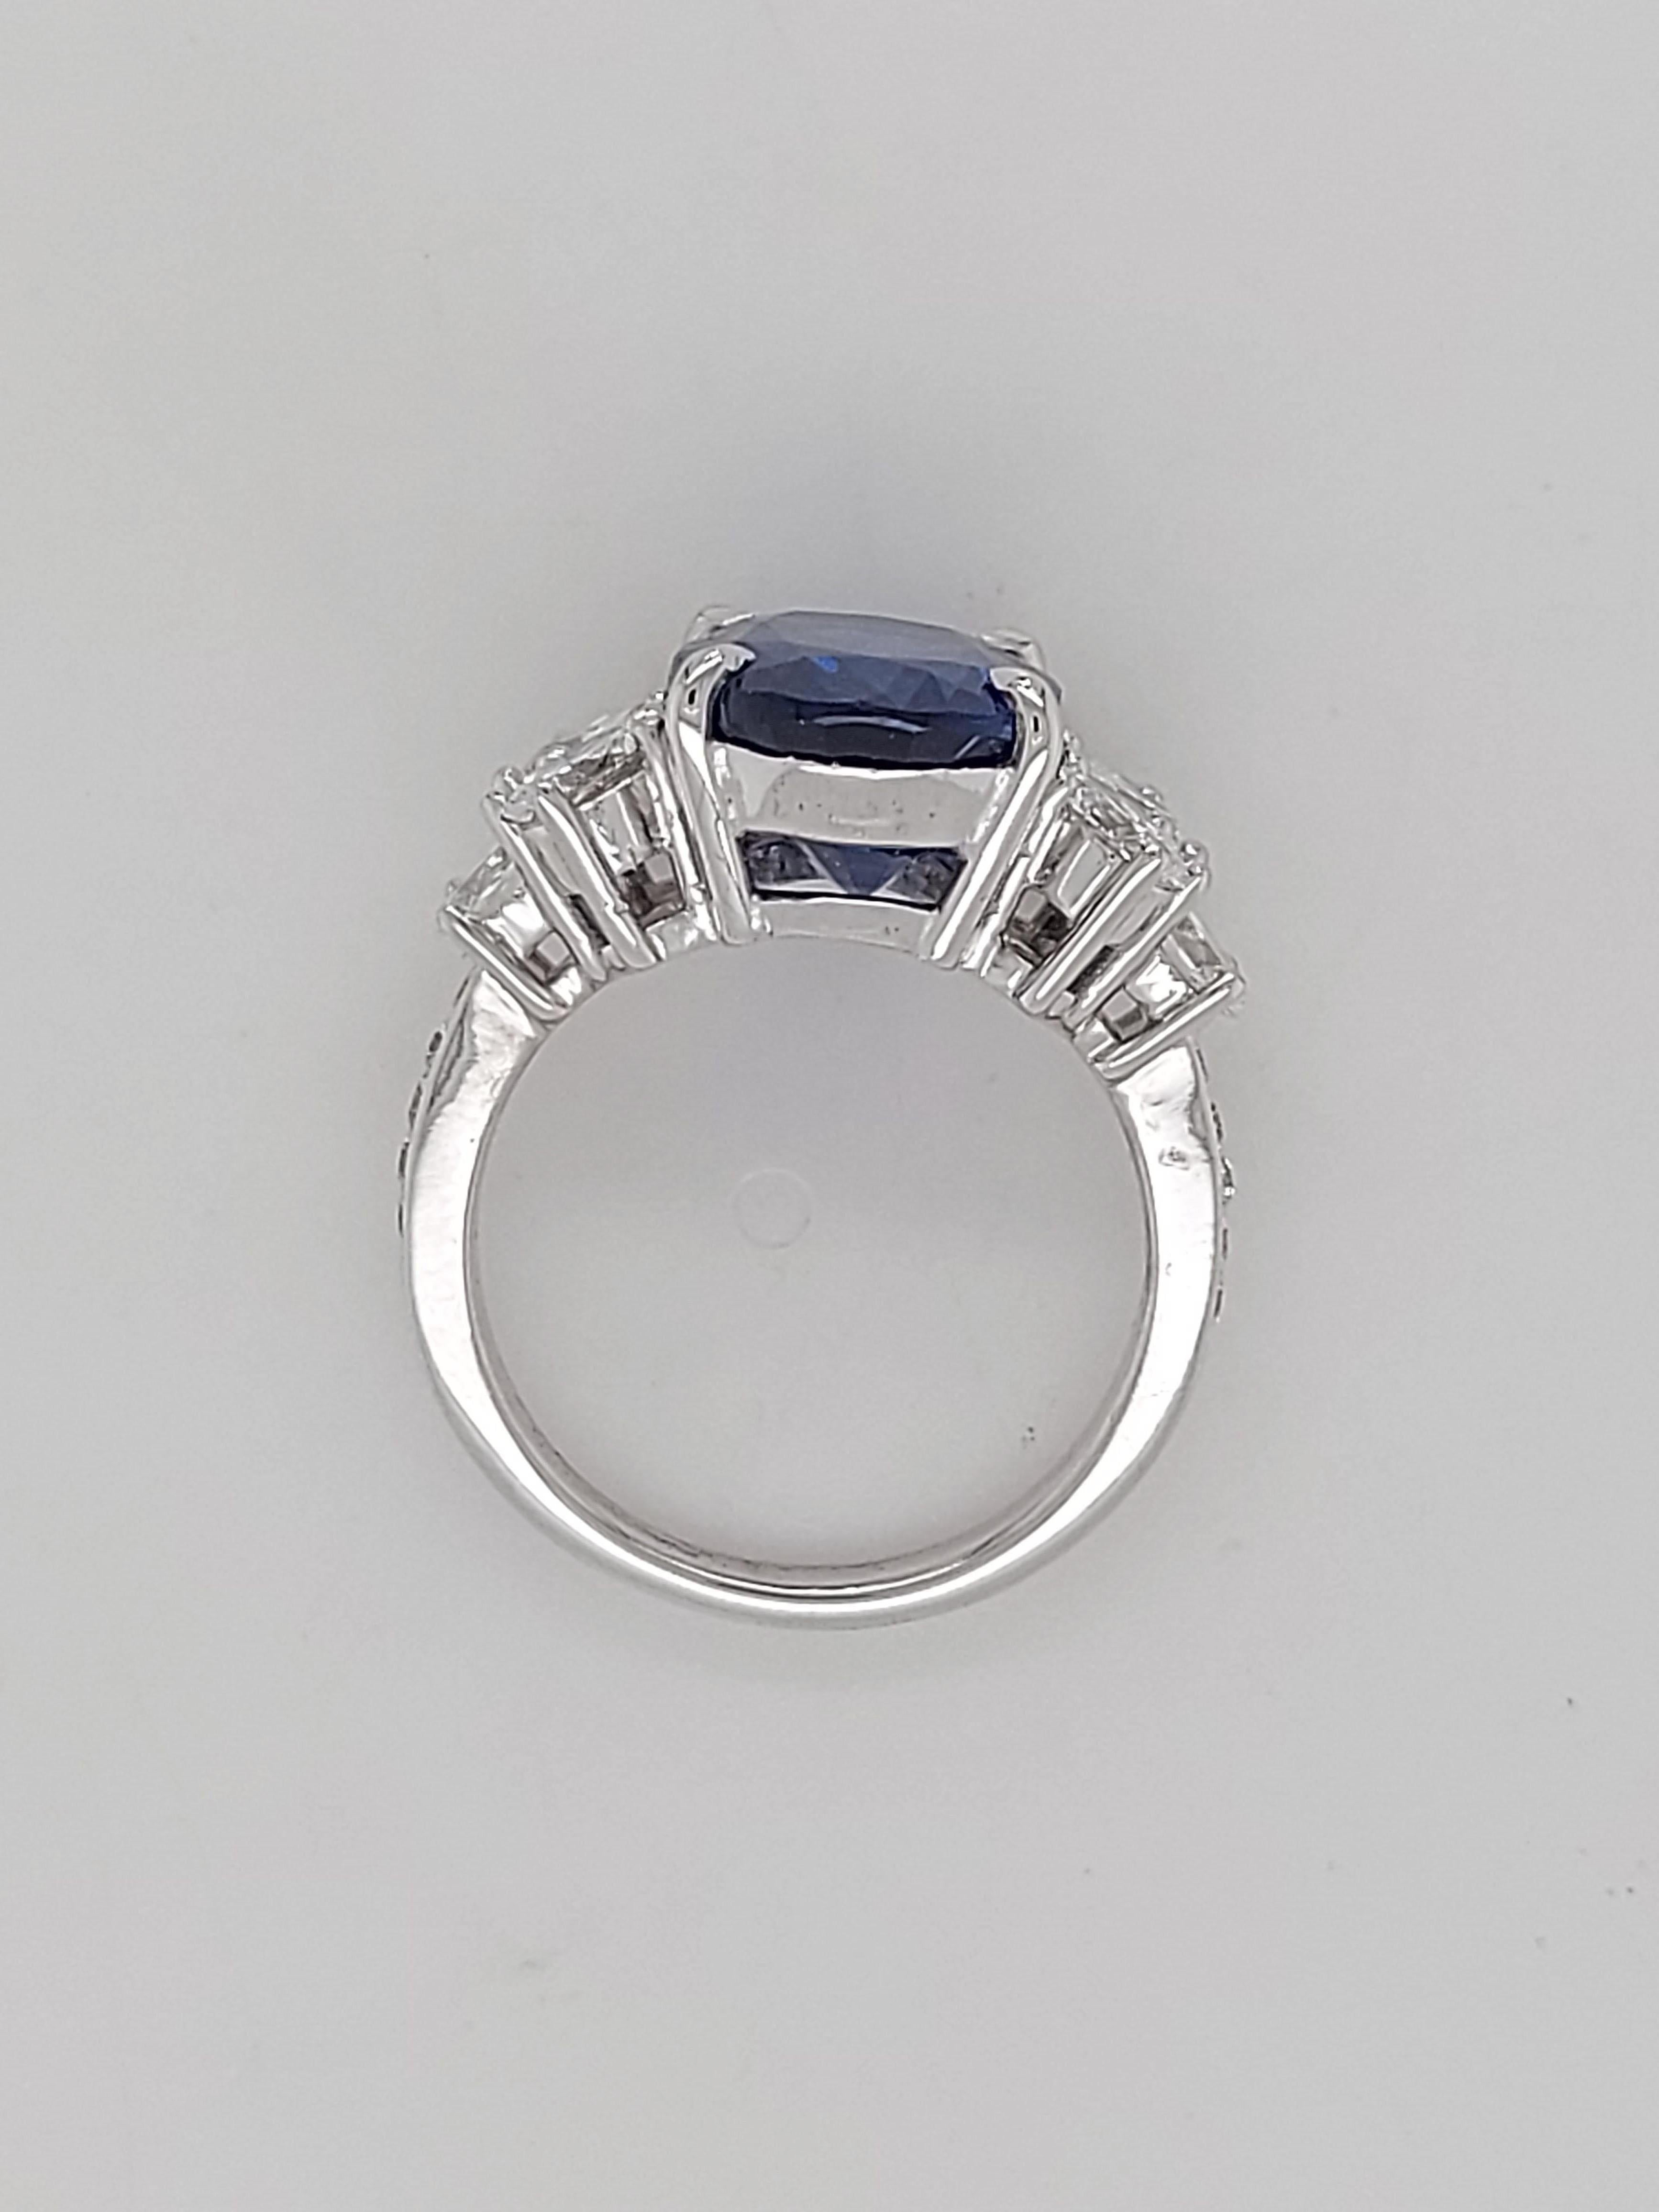 18 Karat White Gold Ring Set with a 7 Carat Sapphire and Diamonds 7